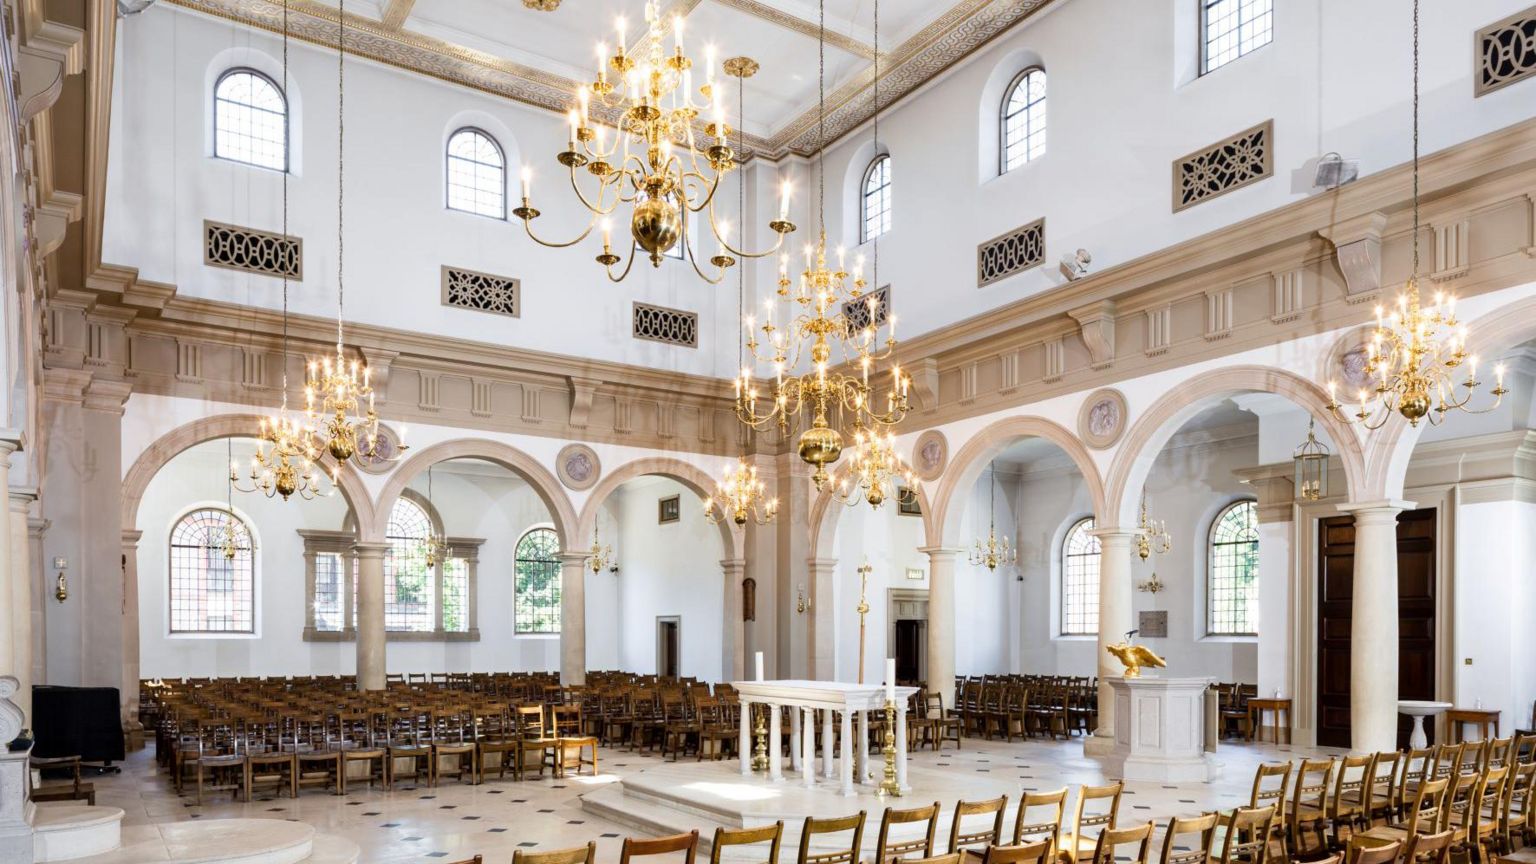 Inside of Brentwood Cathedral